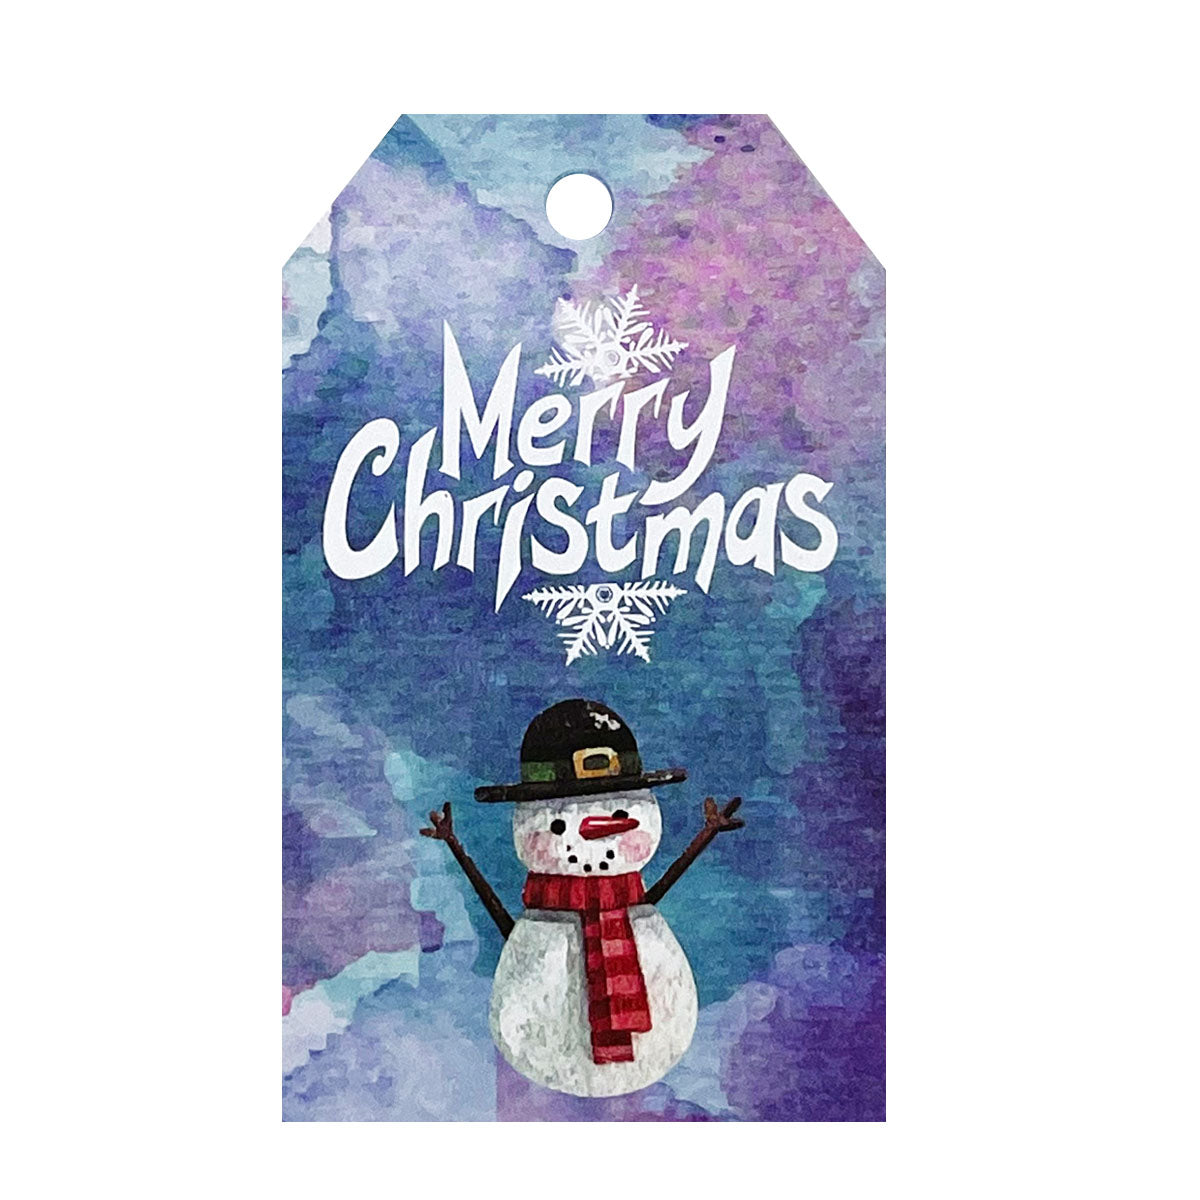 Wrapables® 100 Gift Tags/ Kraft Hang Tags with Free Cut String for Gifts,  Crafts, & Price Tags 